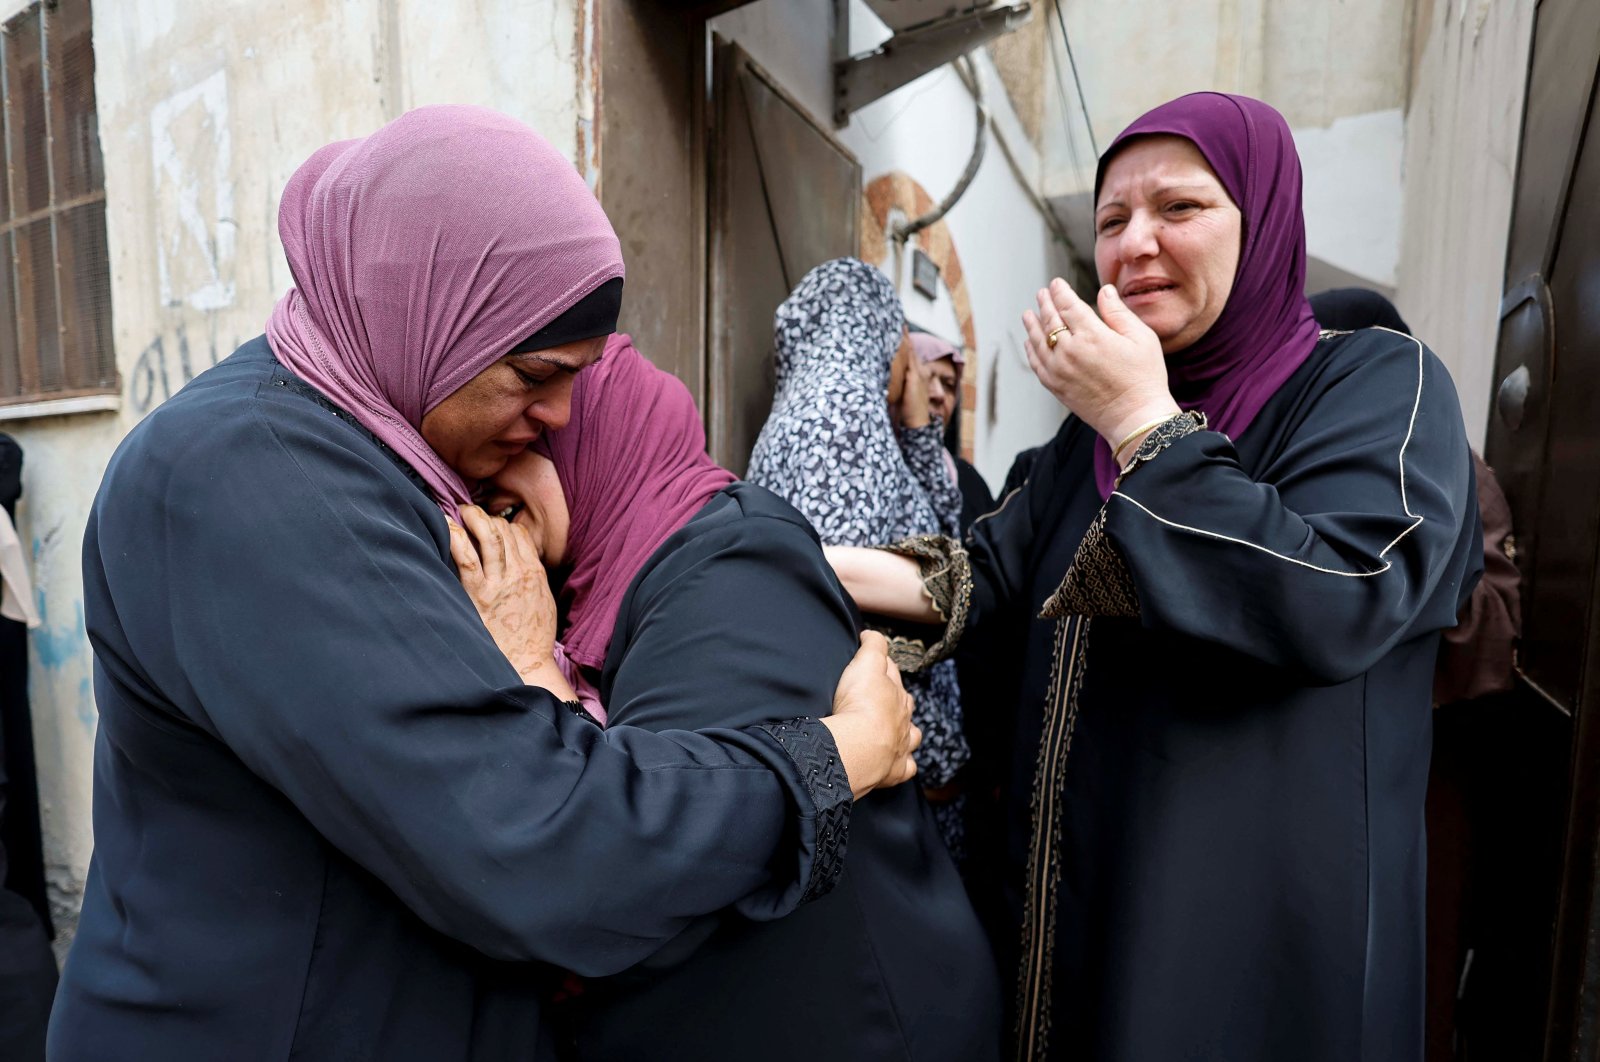 Women mourn during the funeral of Palestinian Salah Al-Buraiki, who was killed by Israeli forces during clashes in a raid, Jenin, Israeli-occupied West Bank, Oct. 21, 2022. (Reuters Photo)